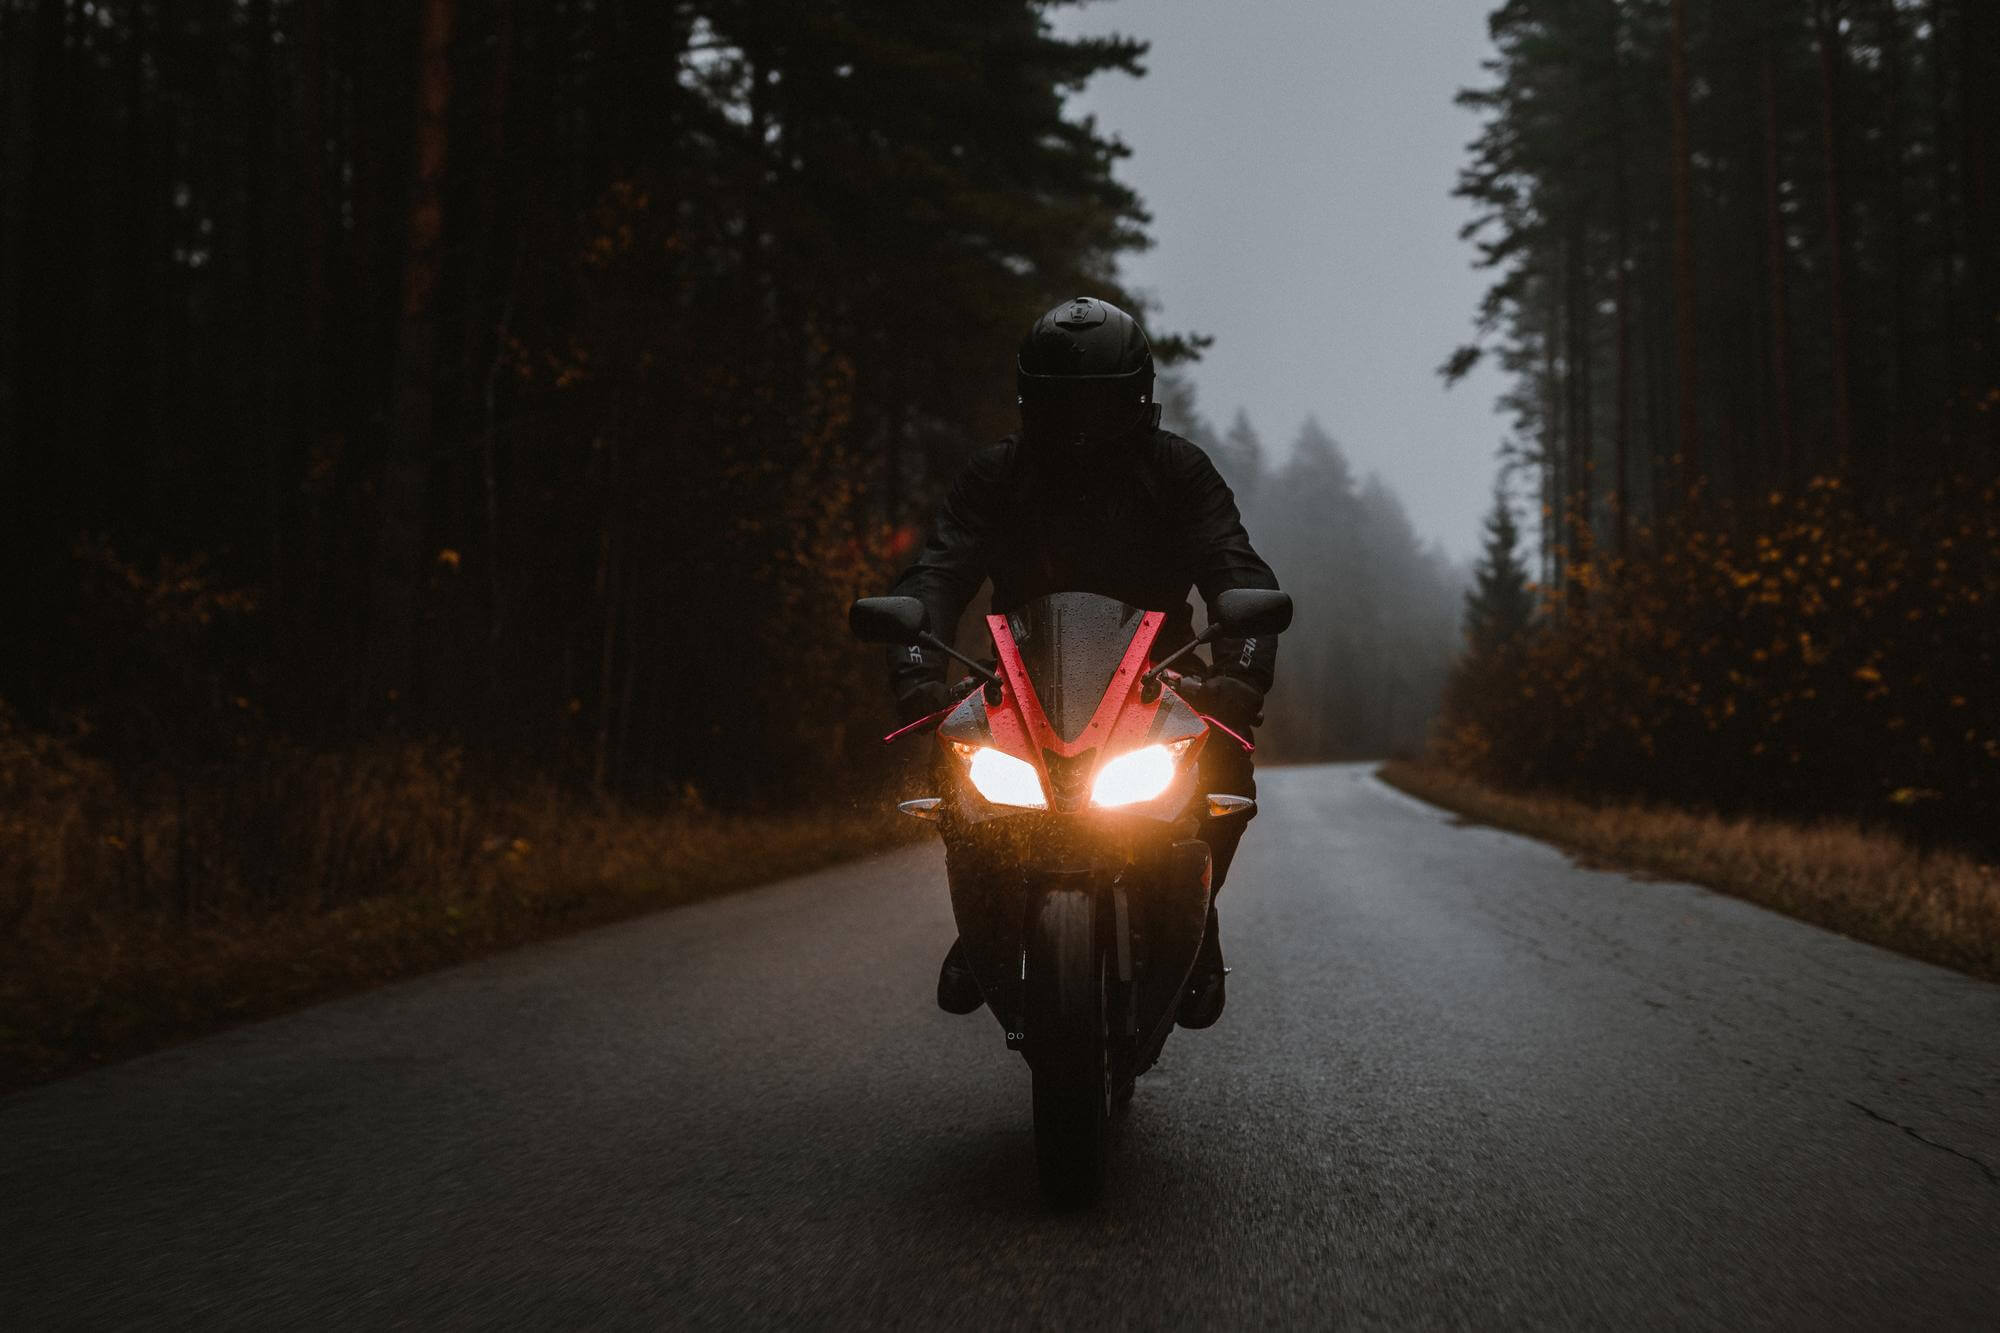 Motorcycle driving towards camera in autumn forest